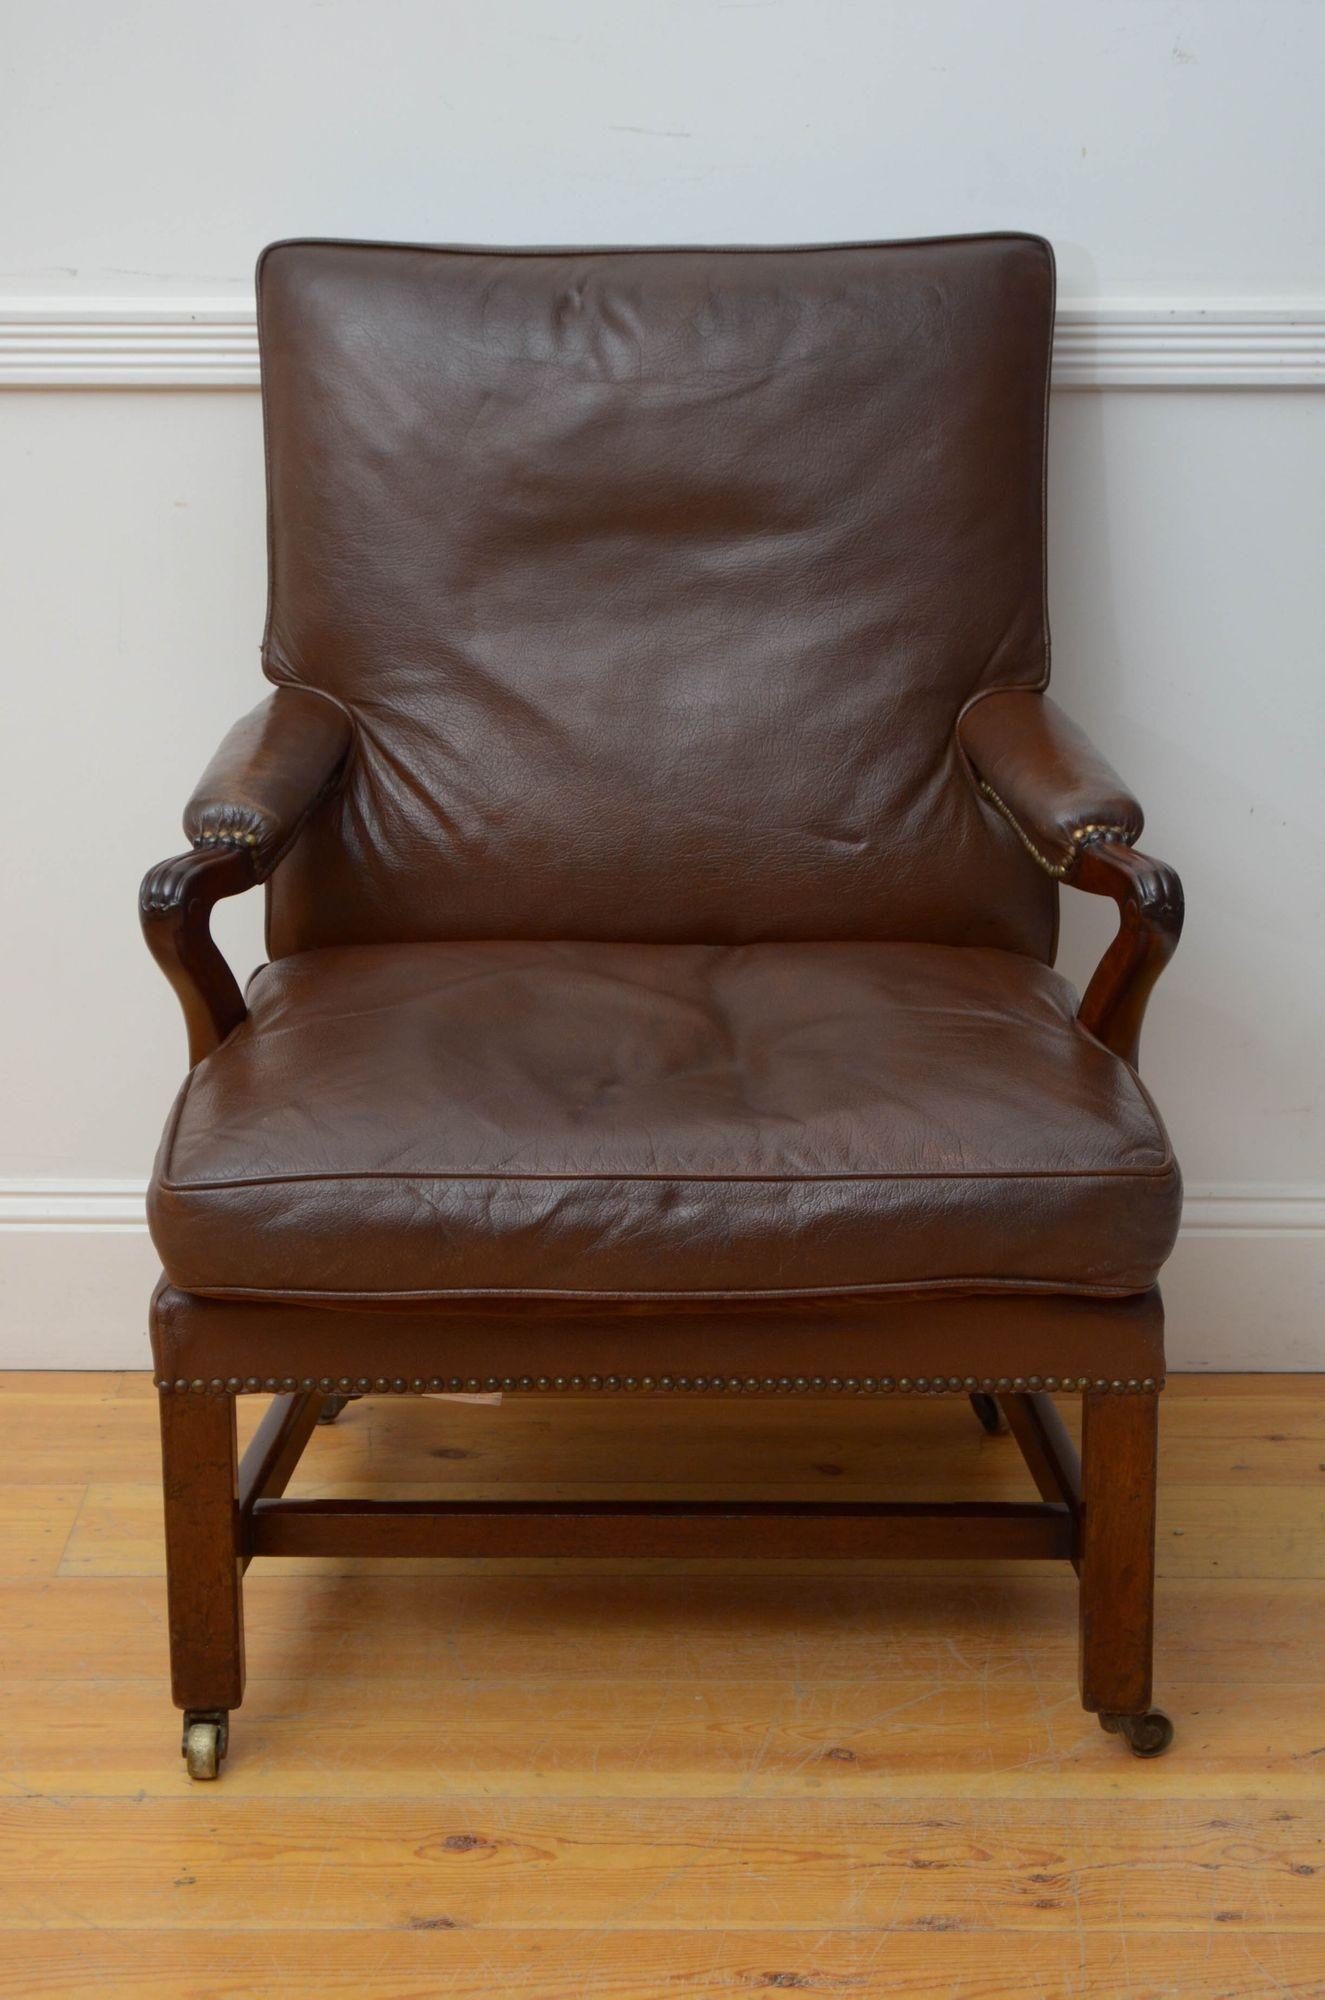 Sn5515 Superb Georgian library chair or club chair, having brown leather upholstered back, generous leather seat and open, reeded and leather padded arms with closely studded edge, all standing on simple square legs united by stretchers. This